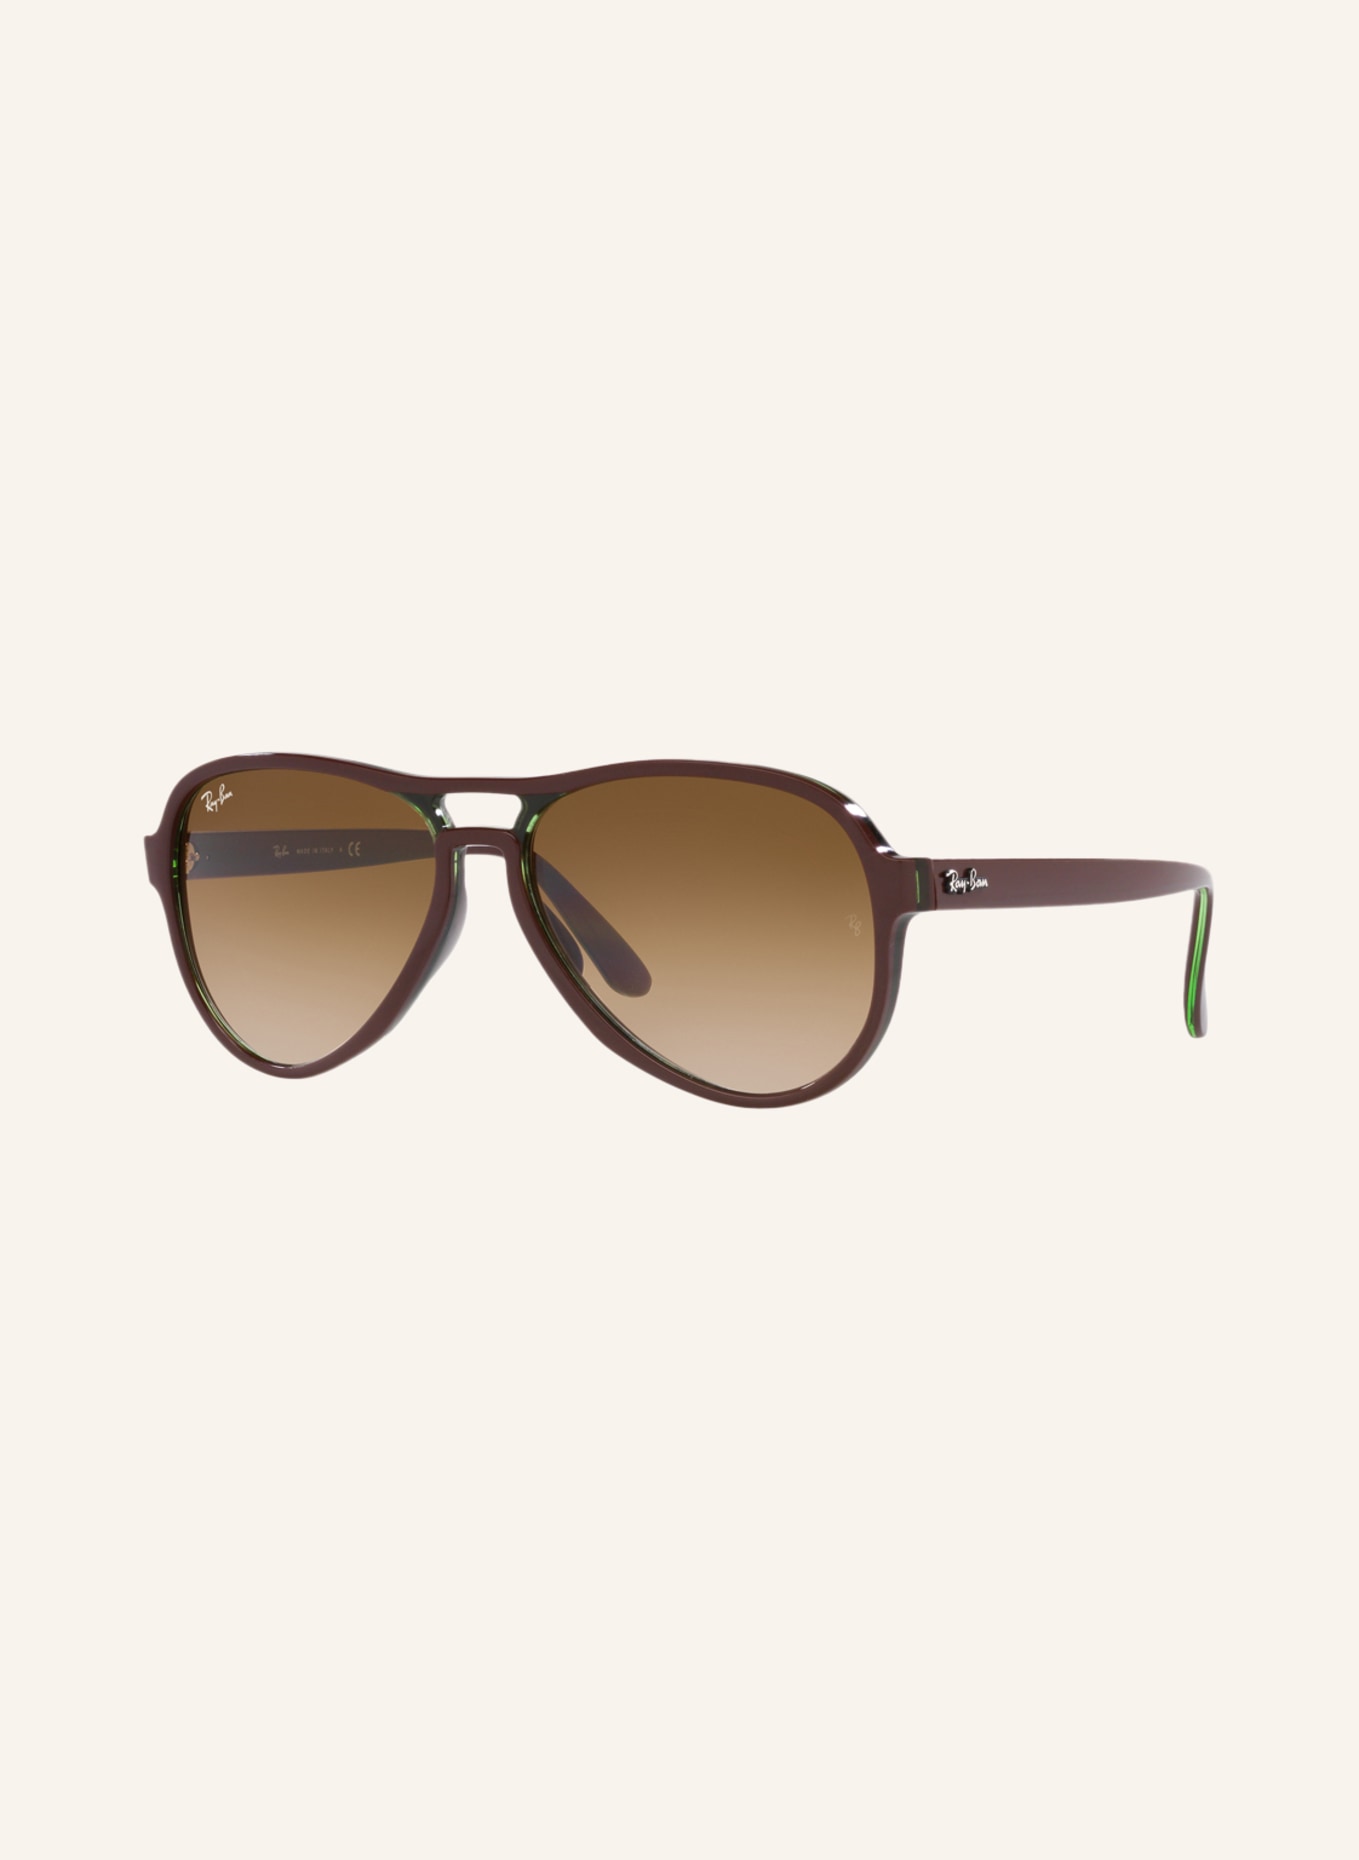 Ray-Ban Sunglasses RB 4355, Color: 660451 - BROWN/ BROWN GRADIENT (Image 1)